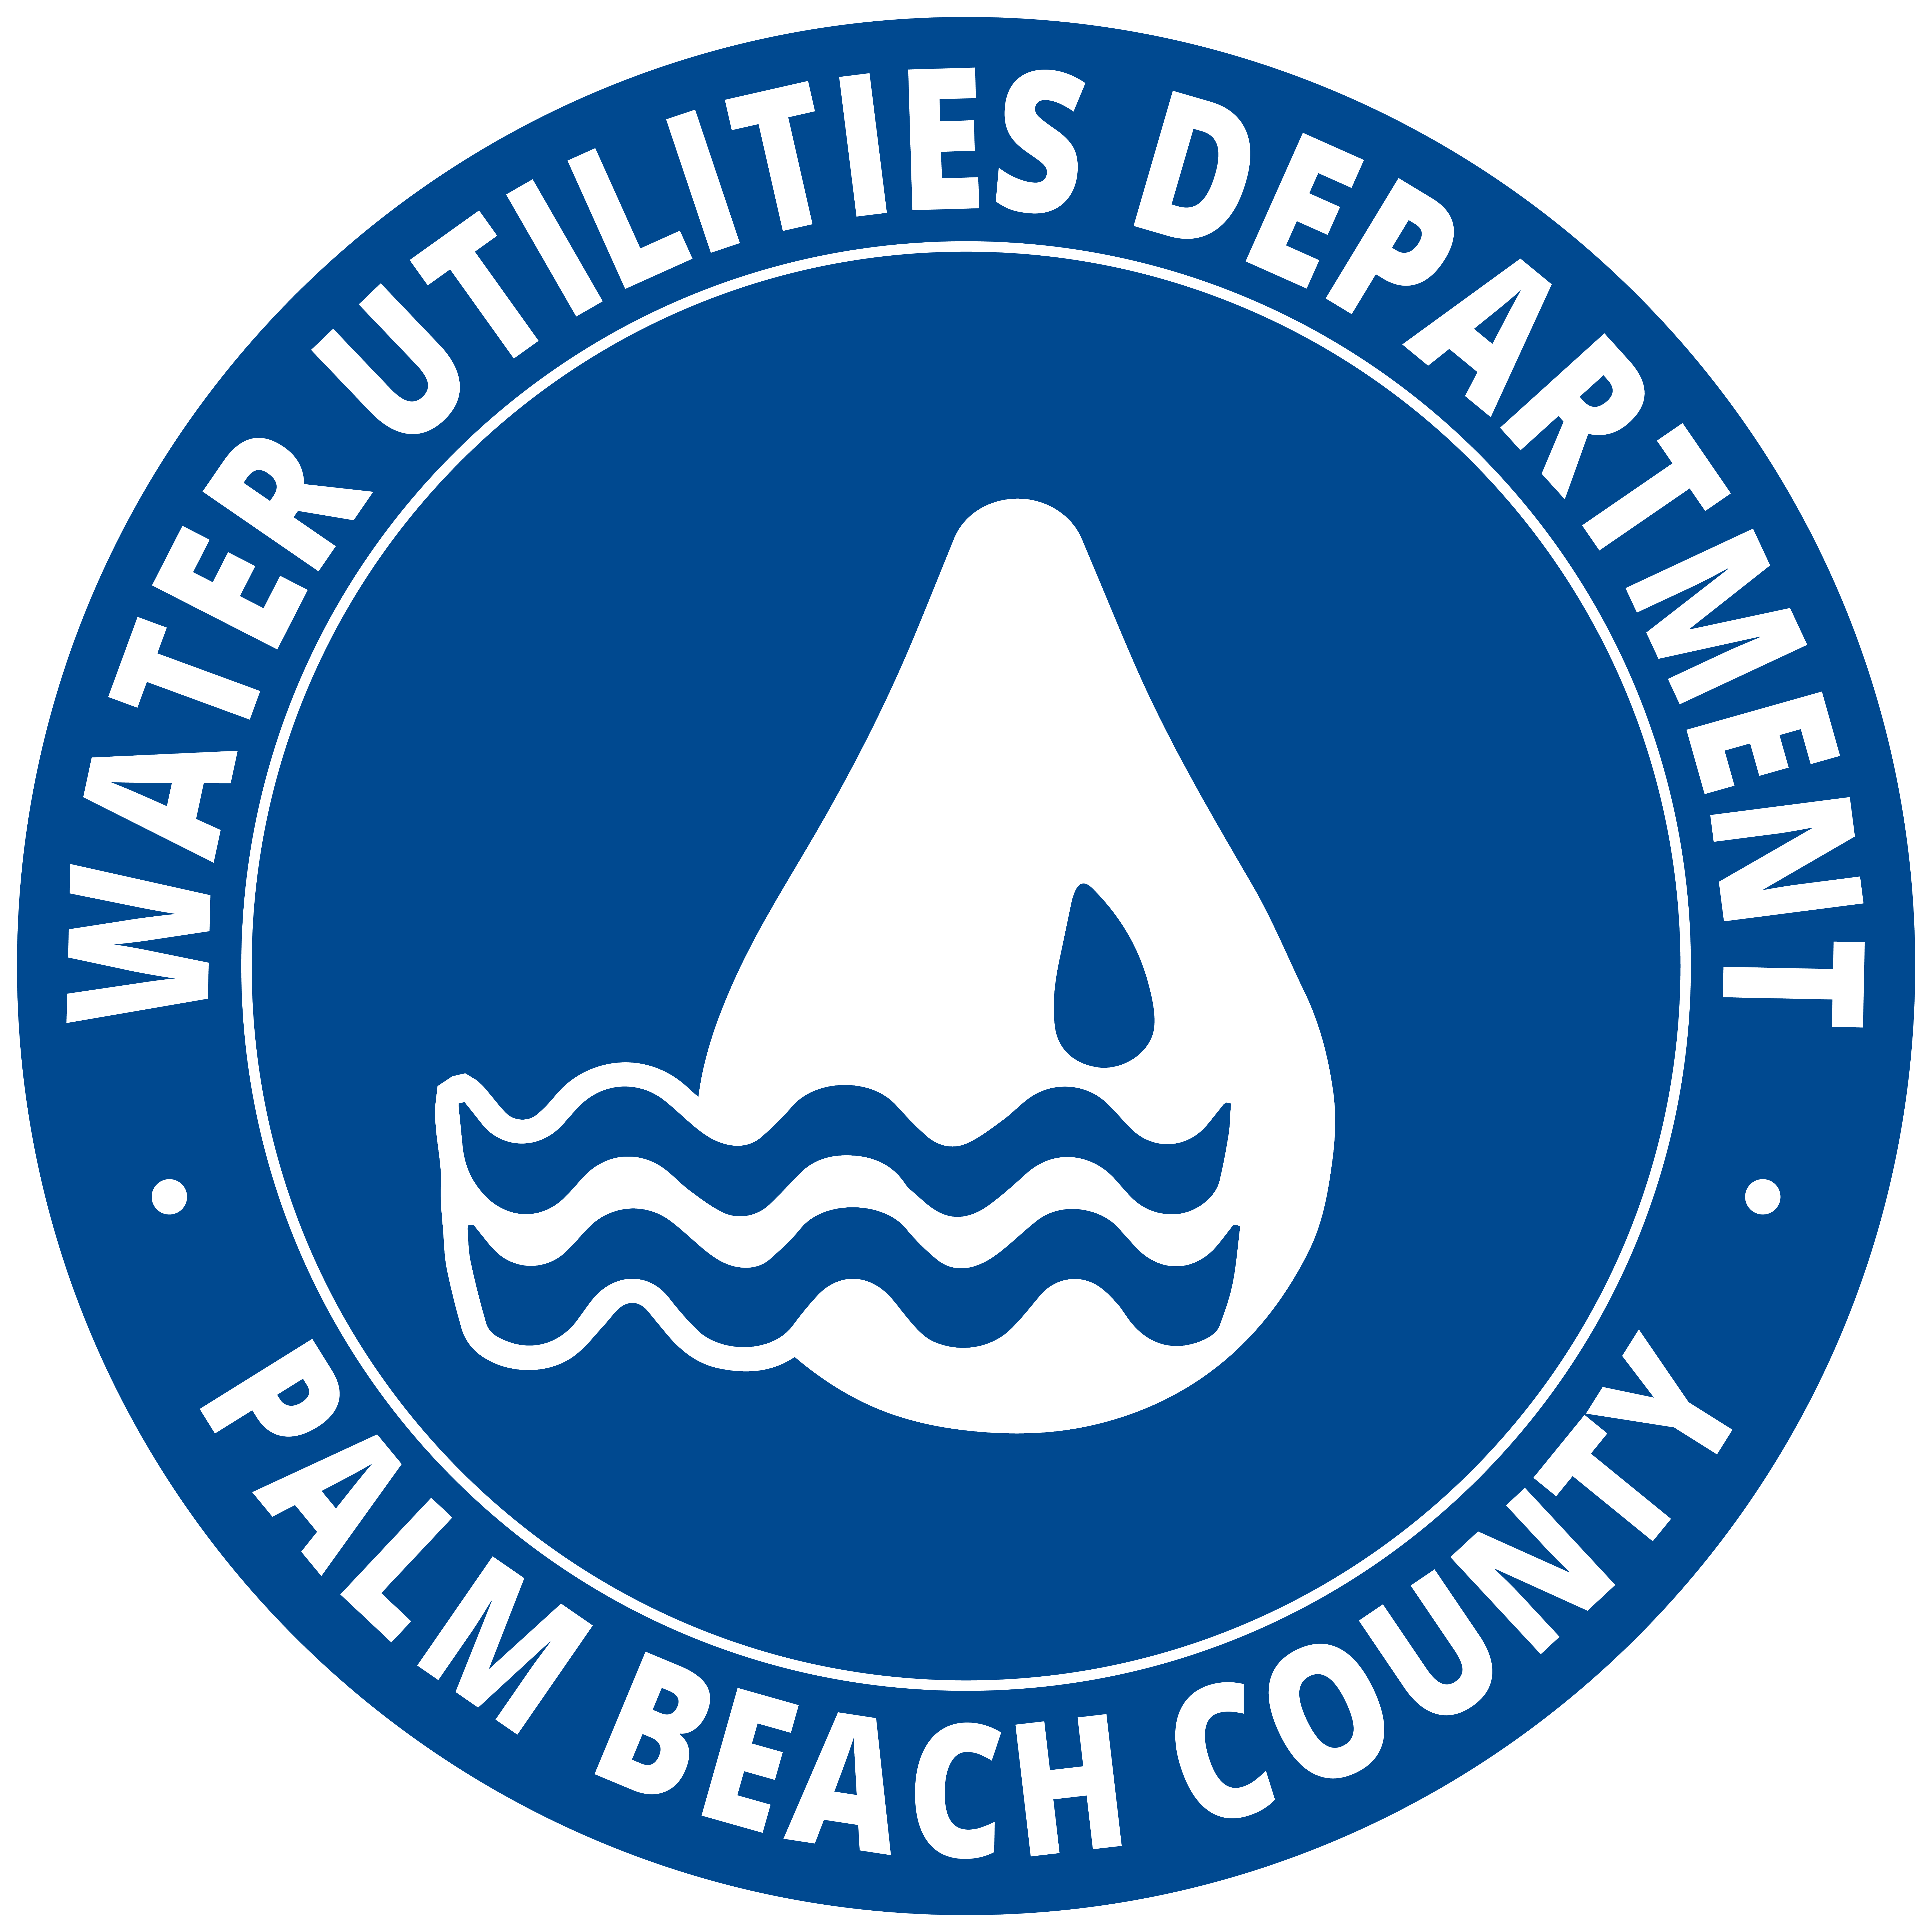 http://pbcauthor/waterutilities/SiteImages/New%20Logo_V1.png